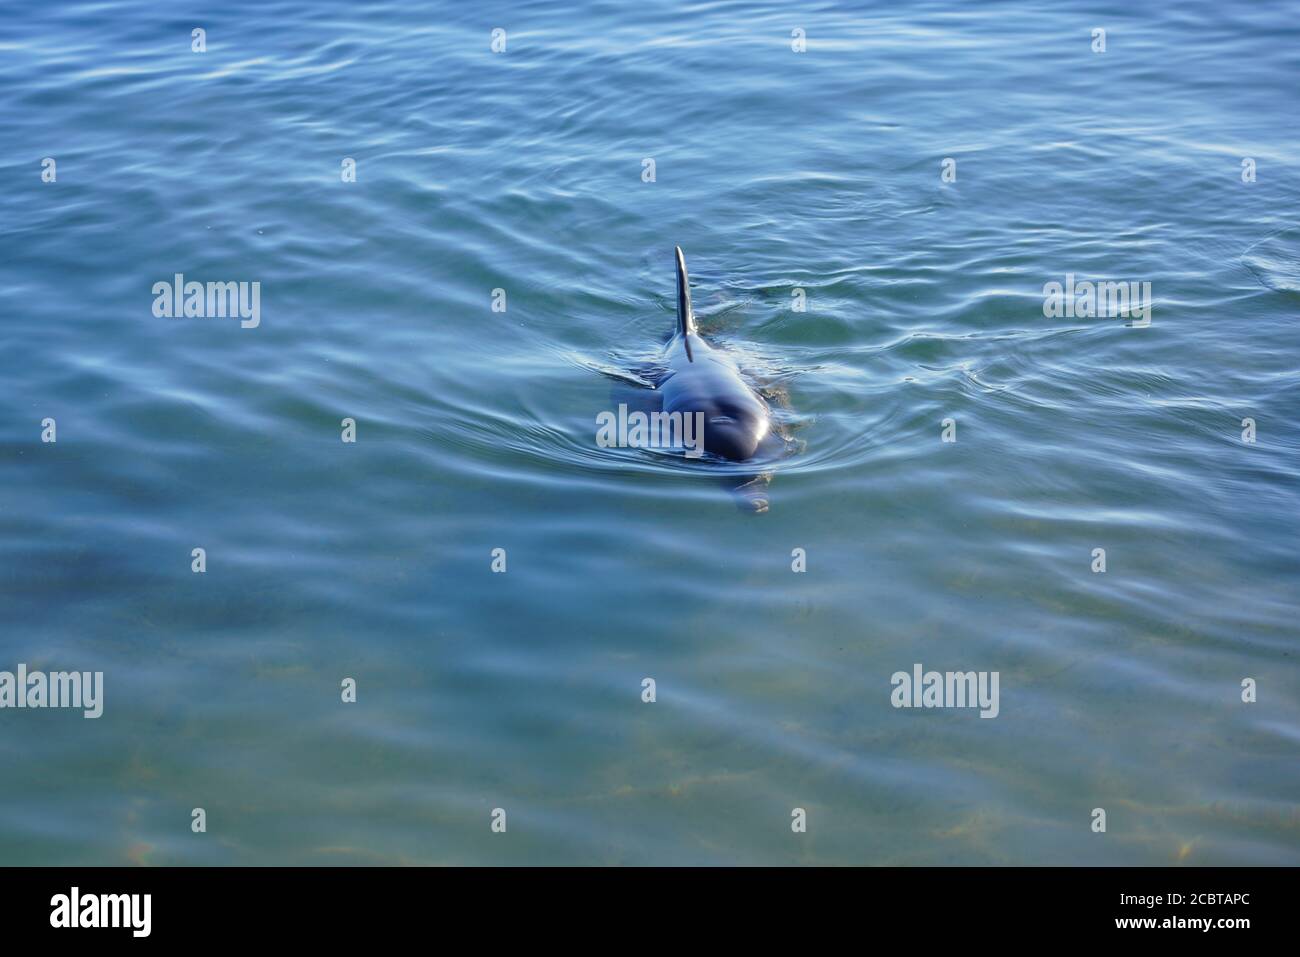 A wild dolphin in the water in Shark Bay, Australia Stock Photo